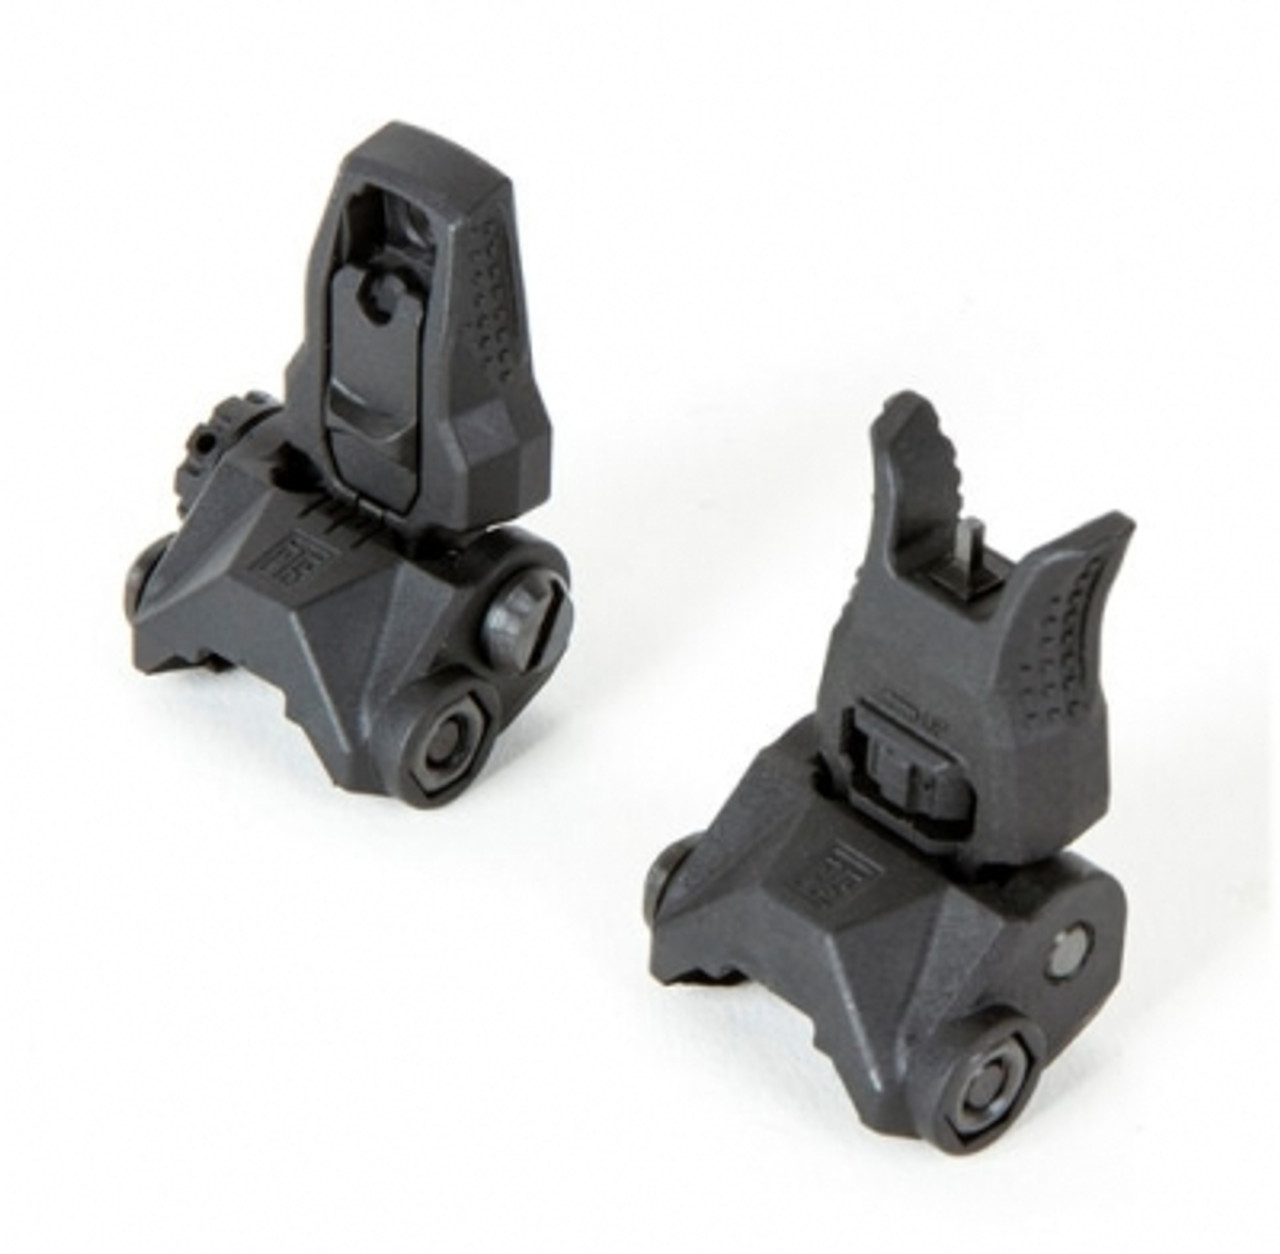 PTS EP Back Up Iron Sight Set (EP BUIS) Front & Rear - Black